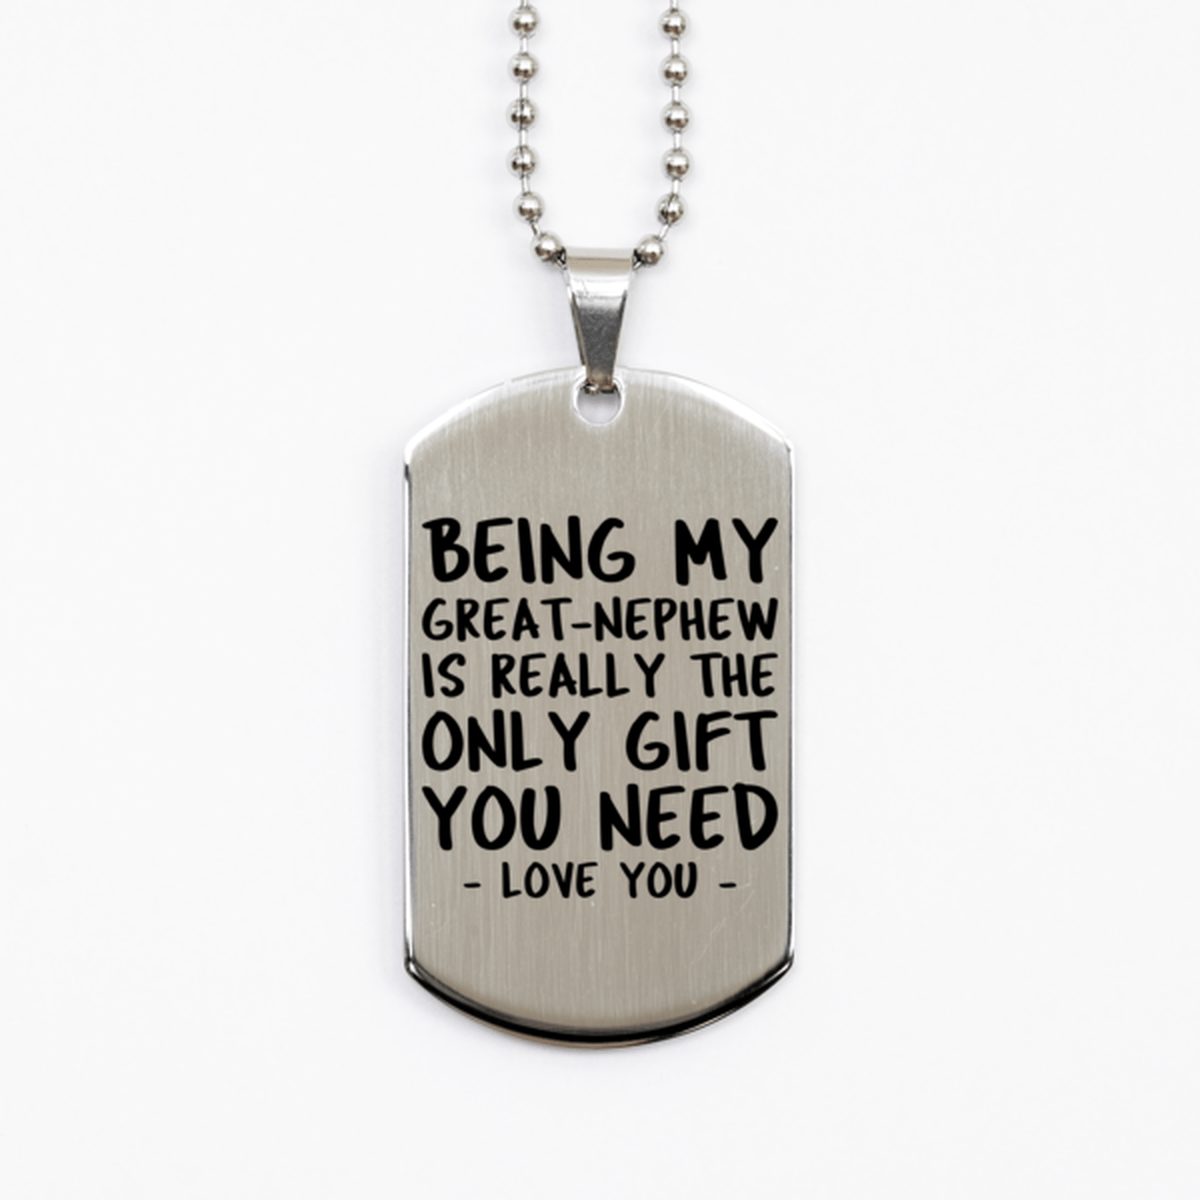 Funny Great-nephew Silver Dog Tag Necklace, Being My Great-nephew Is Really the Only Gift You Need, Best Birthday Gifts for Great-nephew